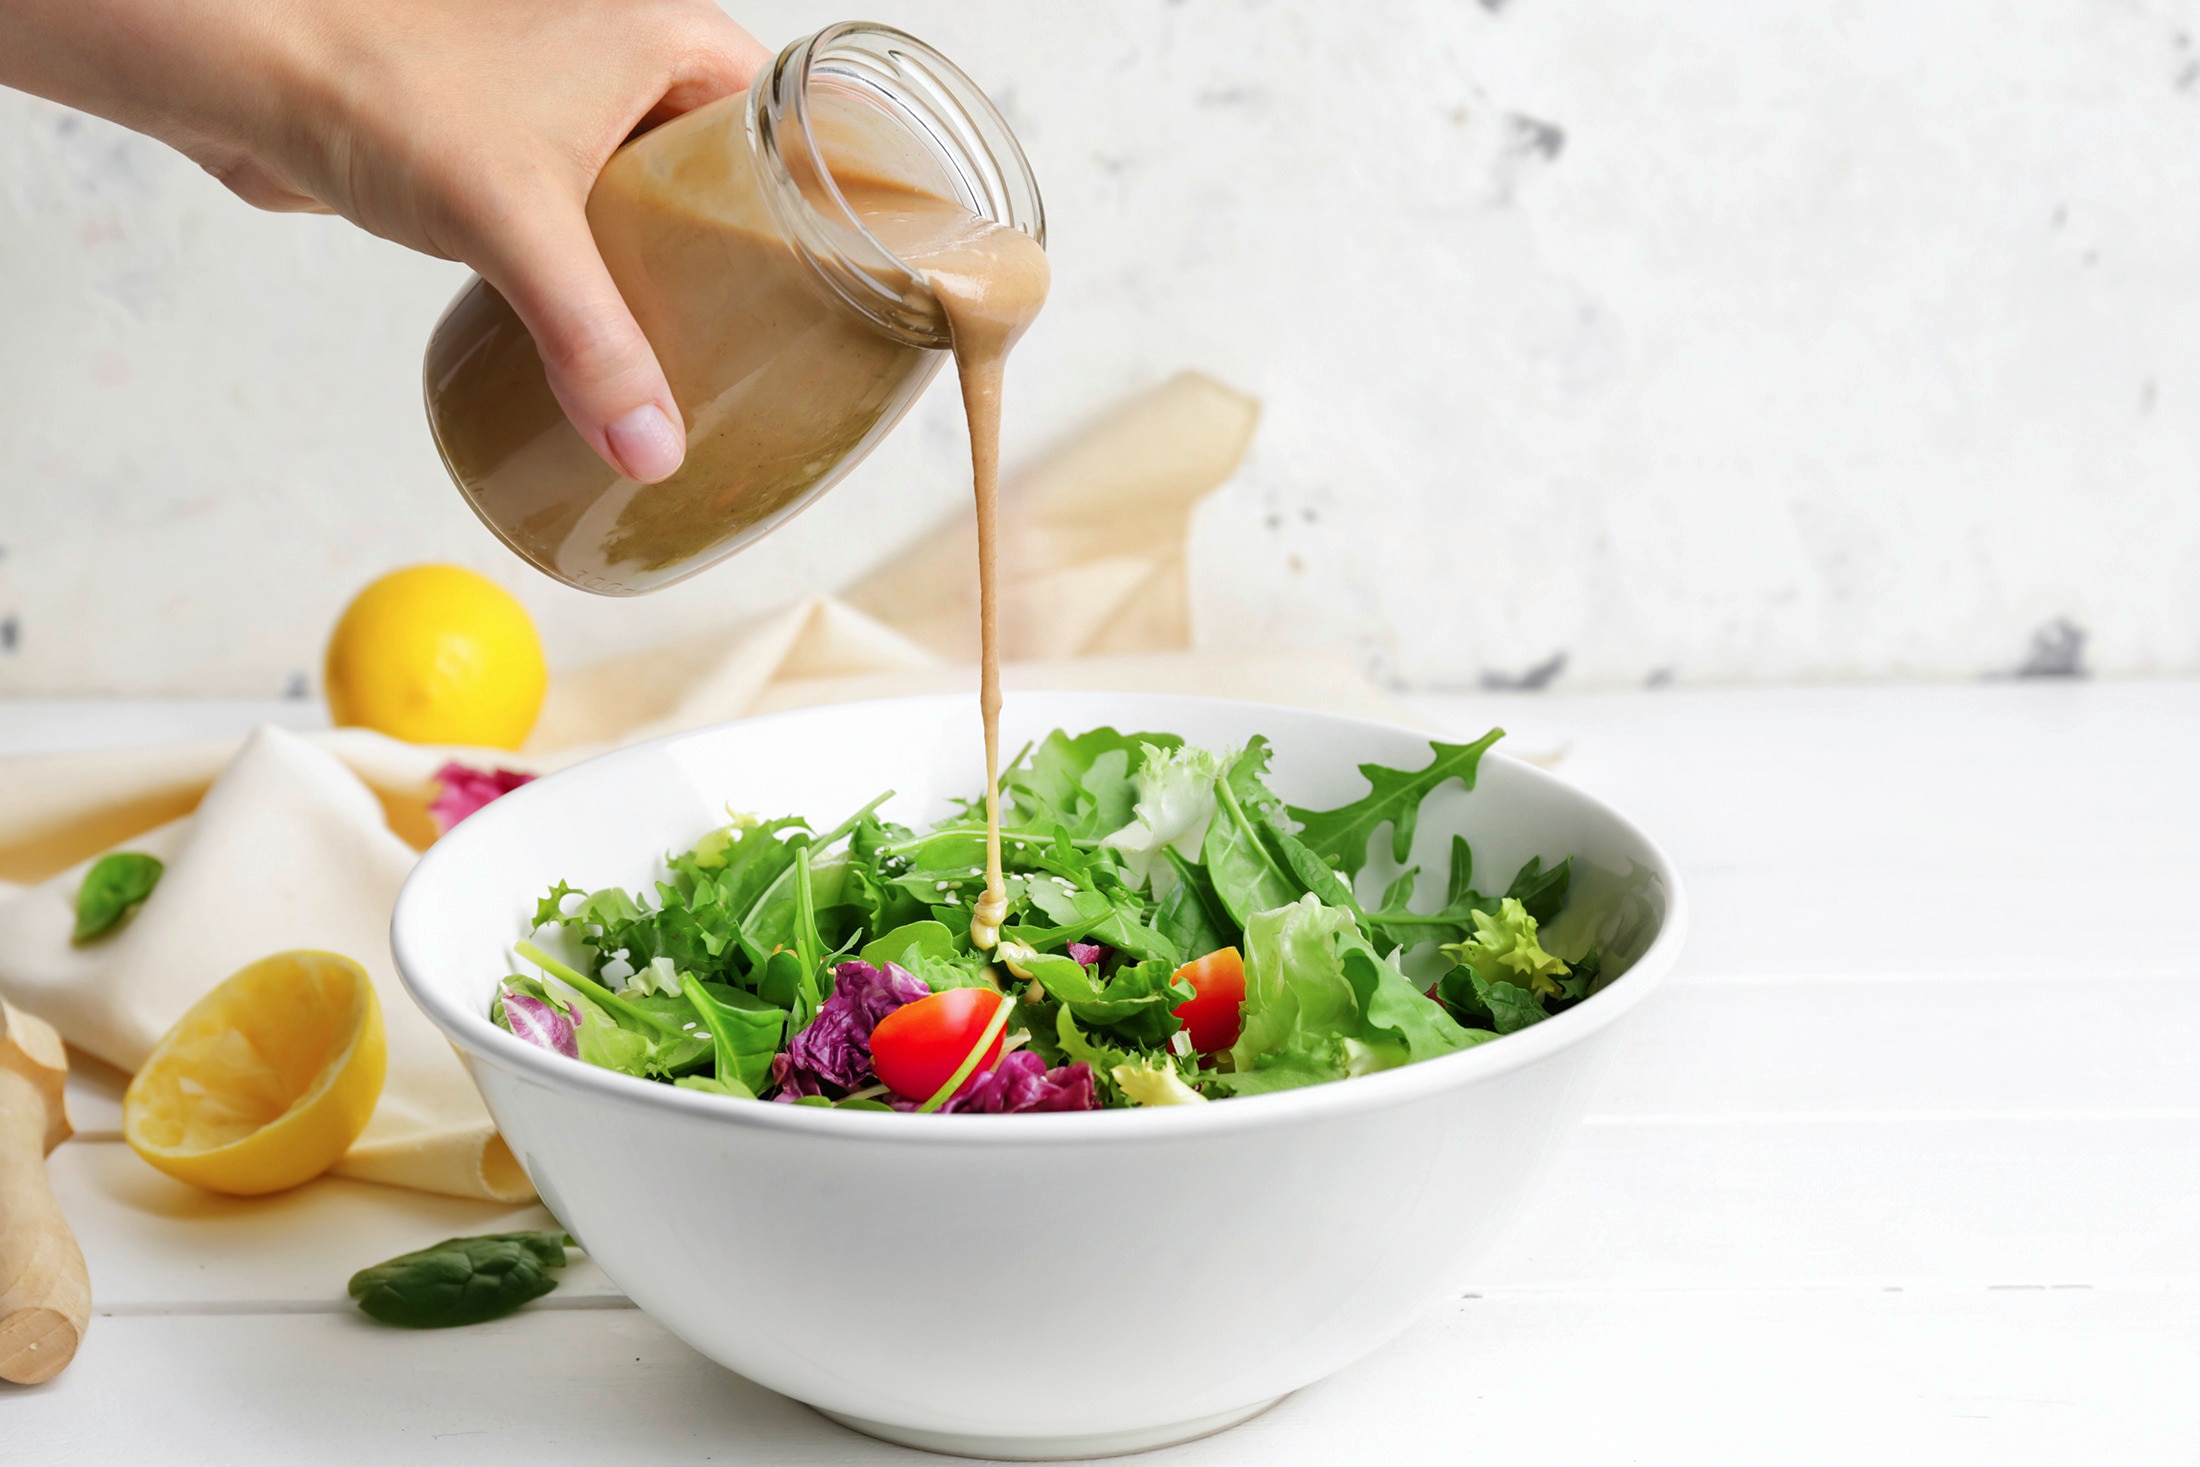 A person pours dressing into a bowl of fresh salad greens